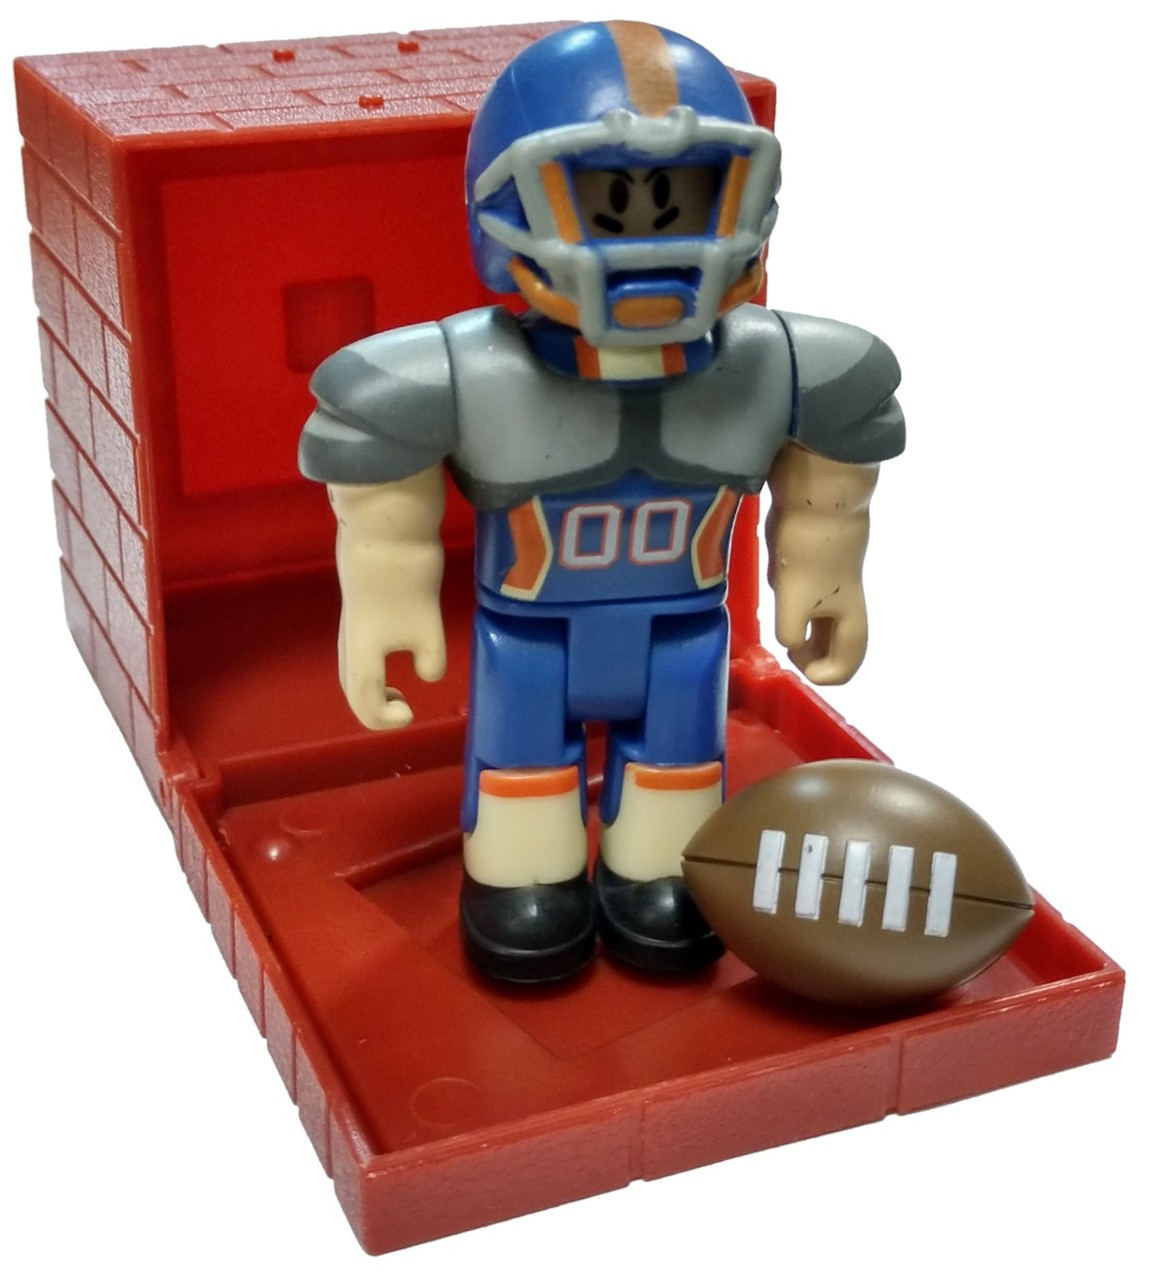 Roblox Red Series 4 Roblox High School Quarterback 3 Mini Figure With Red Cube And Online Code Loose Jazwares Toywiz - roblox high school